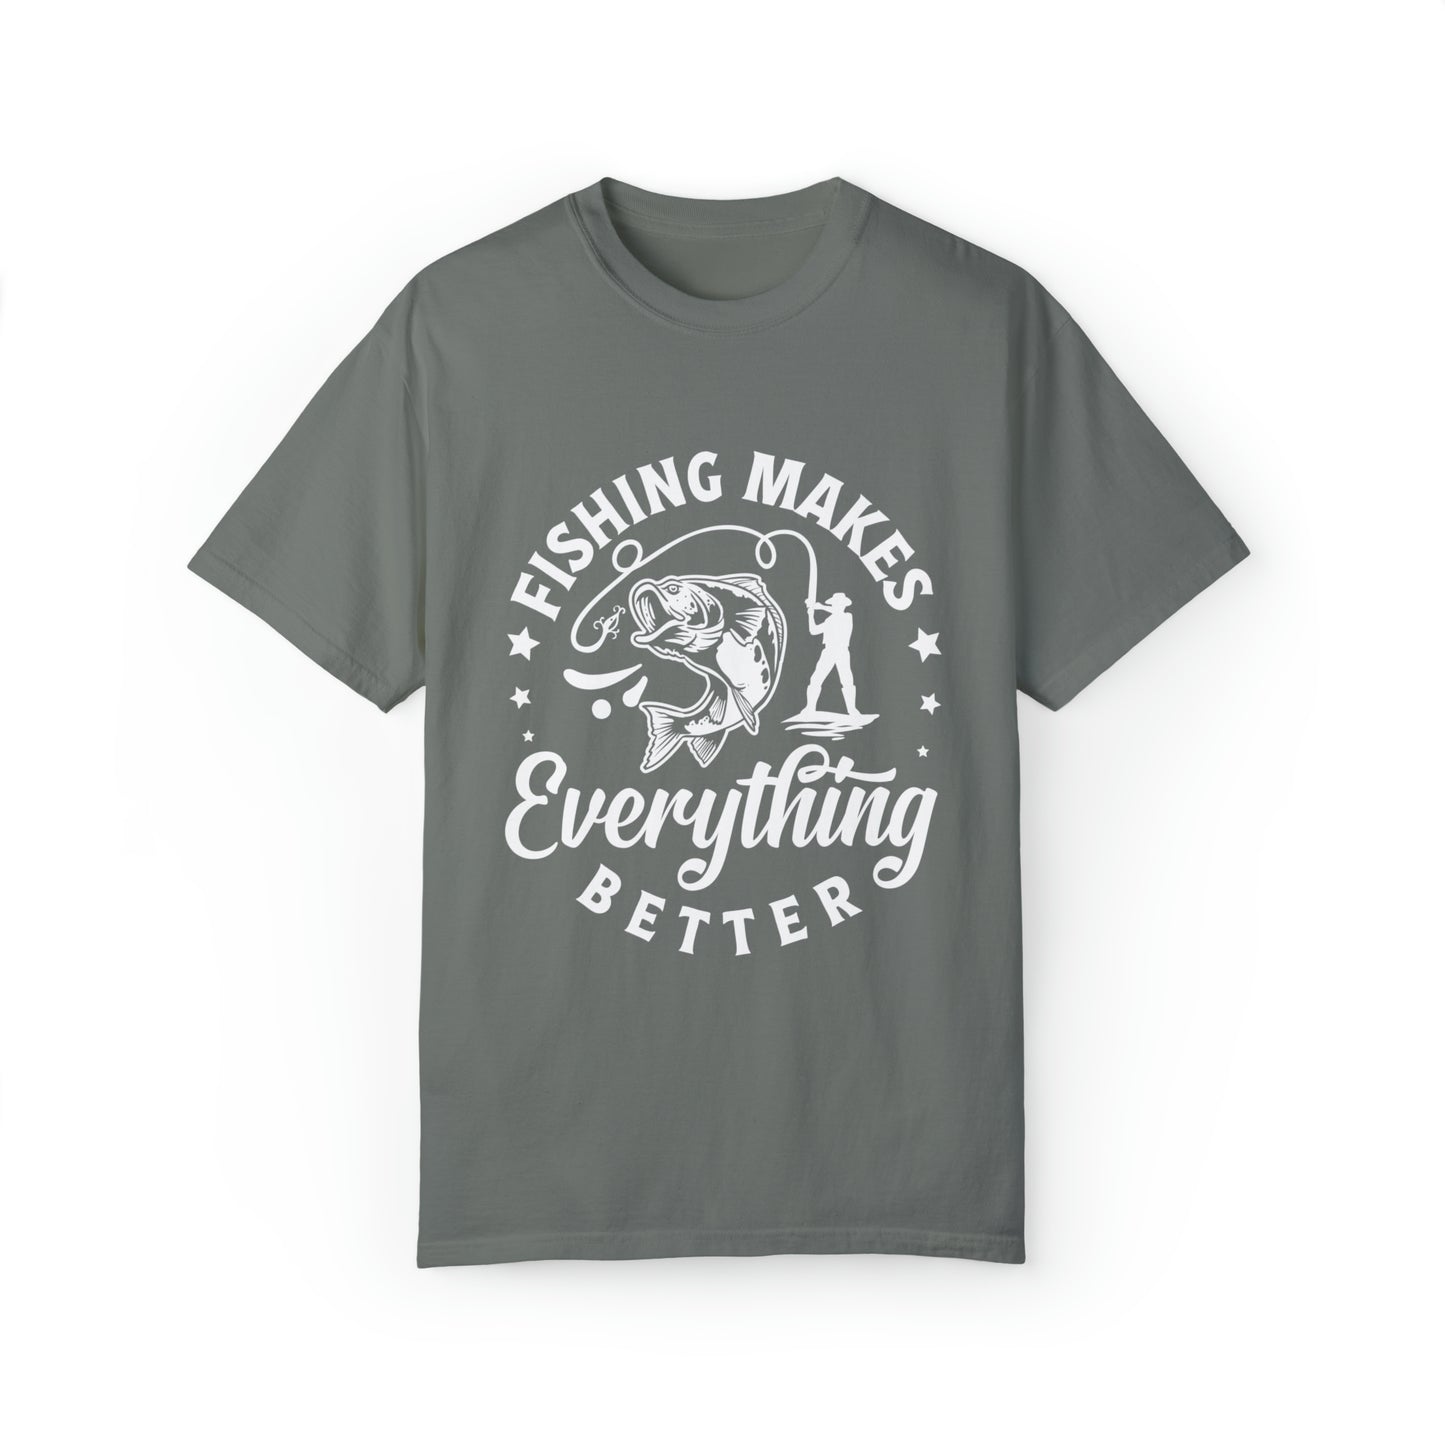 Fishing makes everything better T-shirt